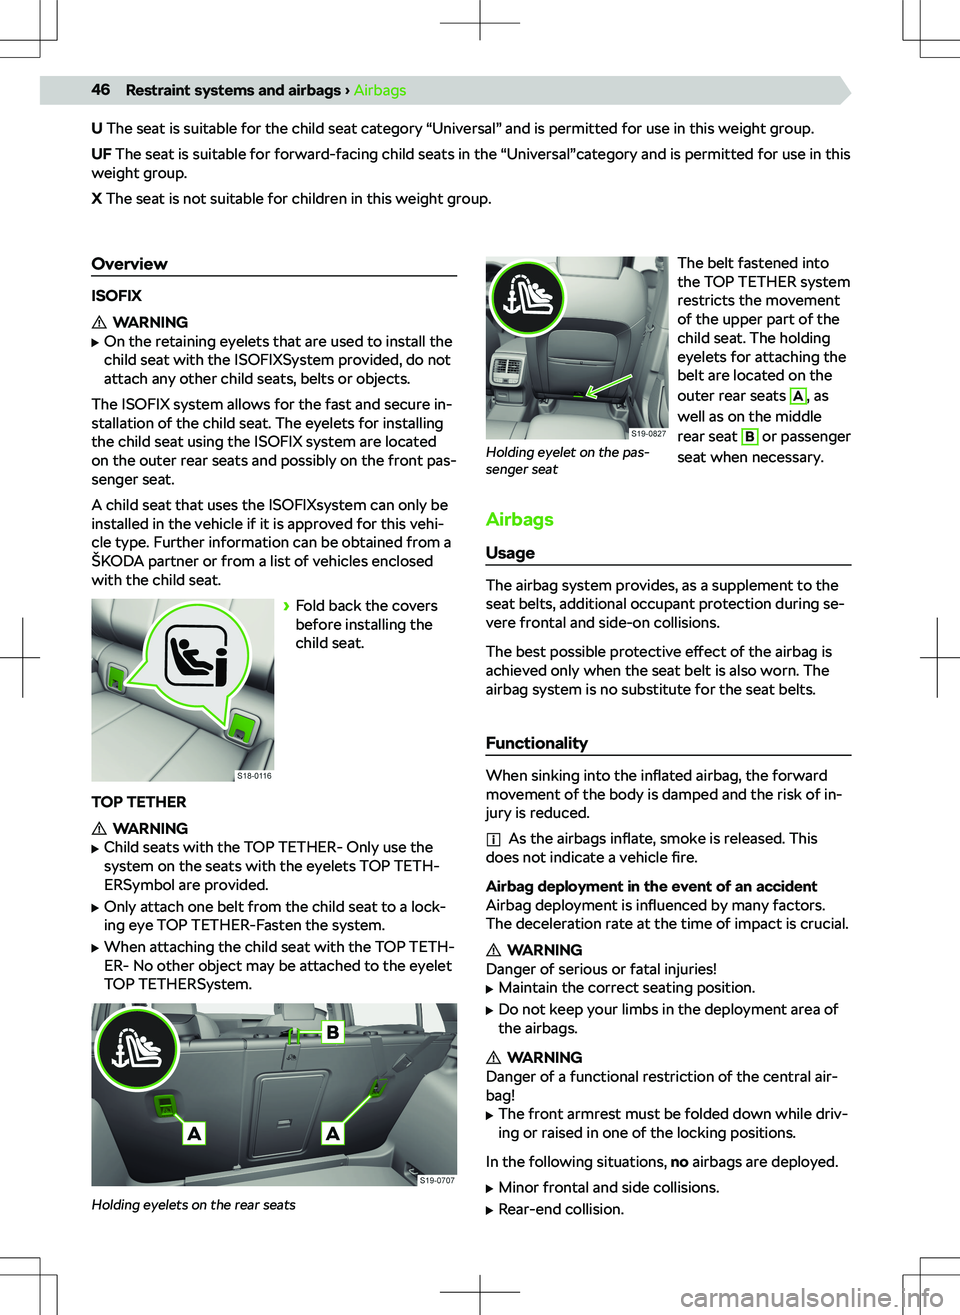 SKODA OCTAVIA 2021  Owner´s Manual U The seat is suitable for the child seat category “Universal” and is permitted for use in this weight group.
UF  The seat is suitable for forward-facing child seats in the “Universal”category